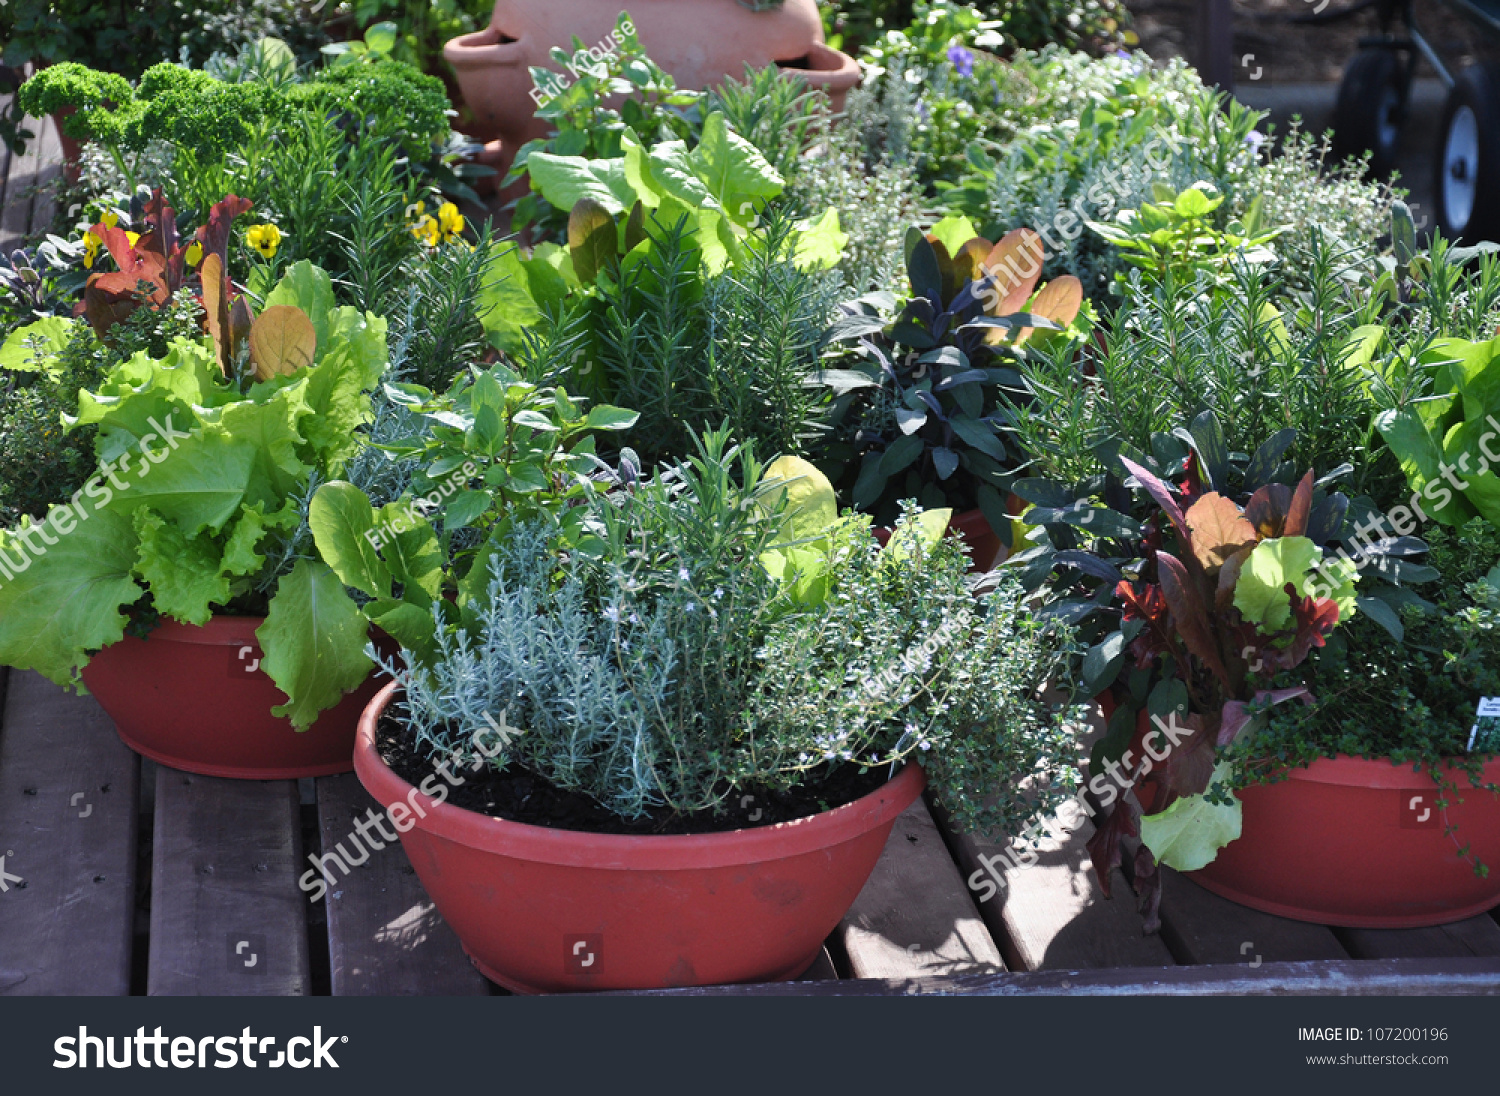 Fresh herbs grown in compact containers suitable for backyard or patio gardening #107200196